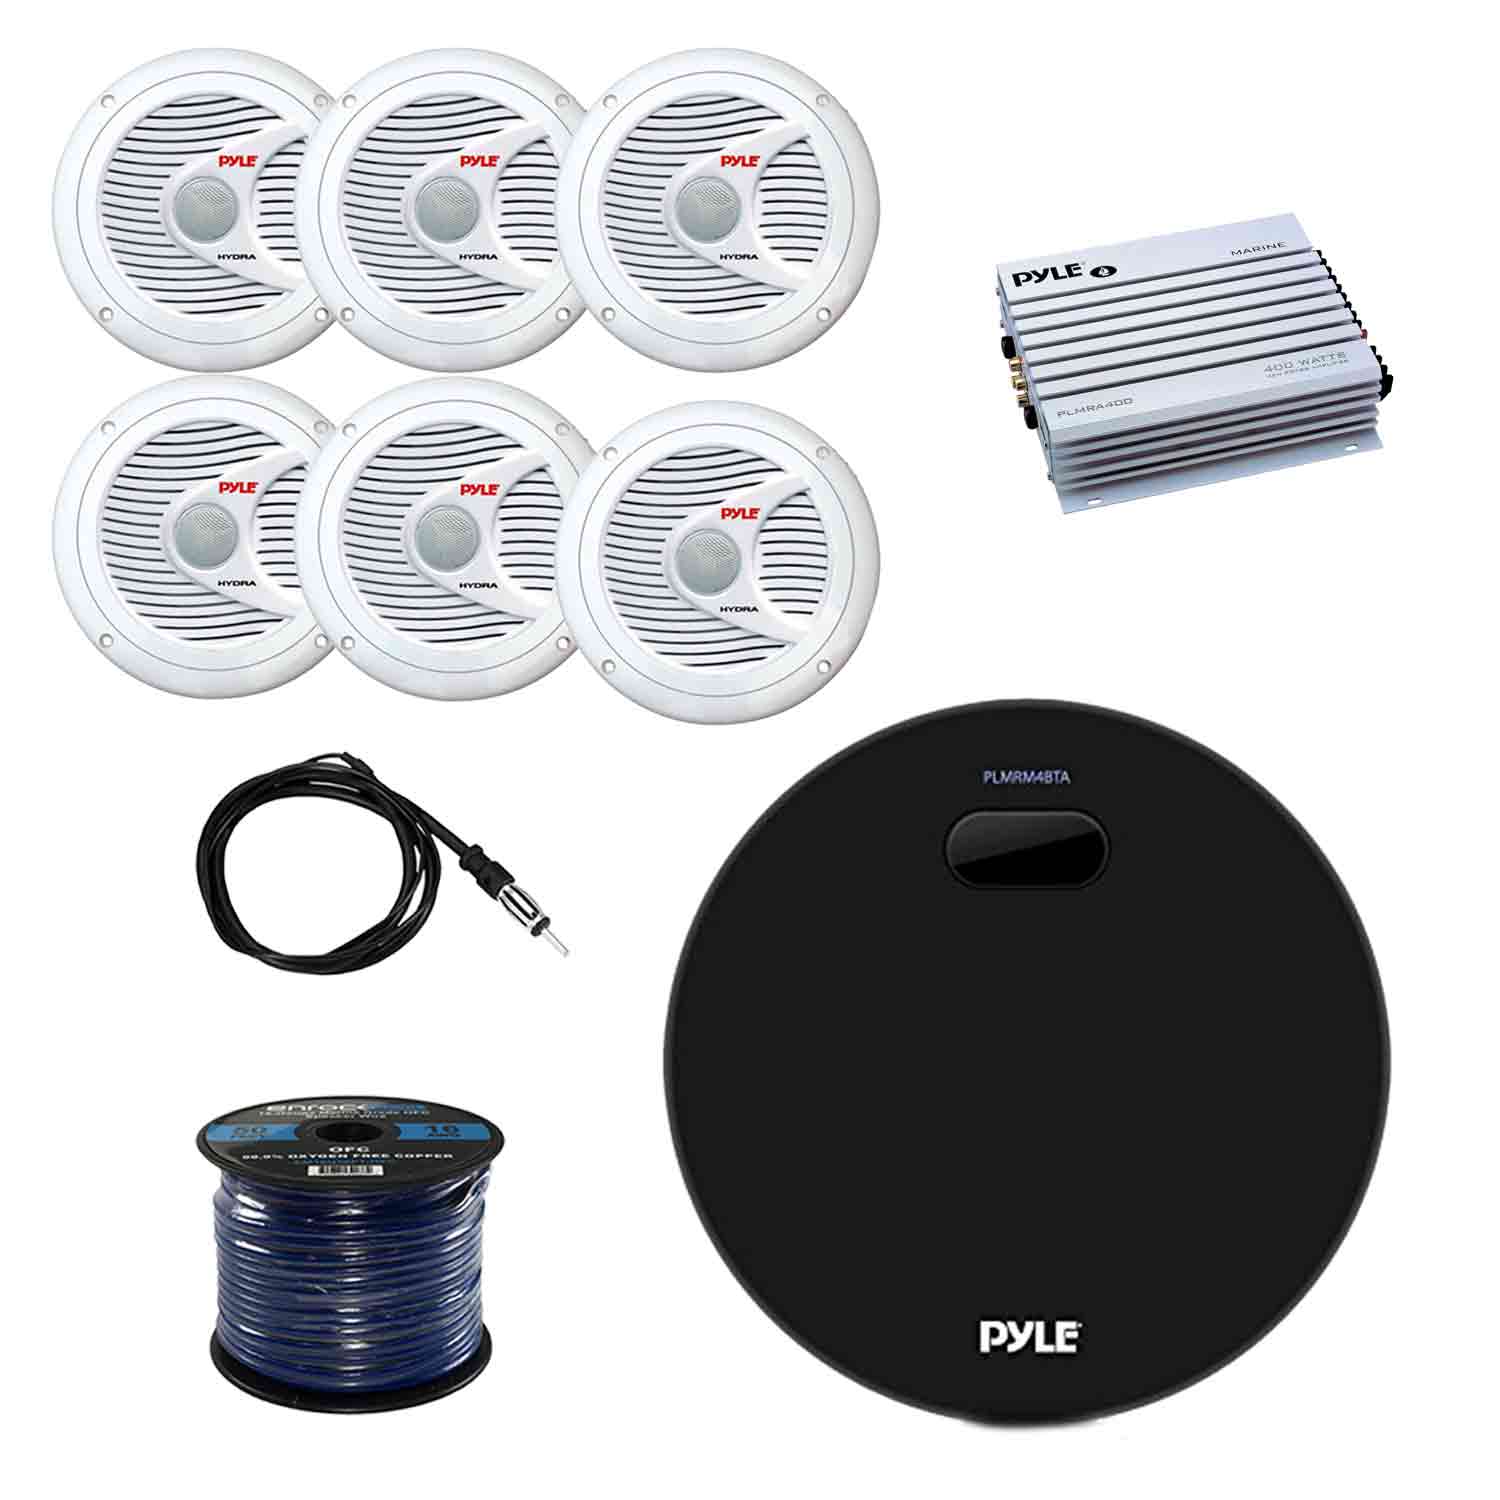 Pyle Marine Bluetooth Water Resistant Amplifier Receiver with Pyle 2 Way Marine Speakers (3-Pairs), Pyle Waterproof Marine Amplifier, Enrock Marine Antenna and Enrock Audio 50' 16G Speaker Wire - image 1 of 6